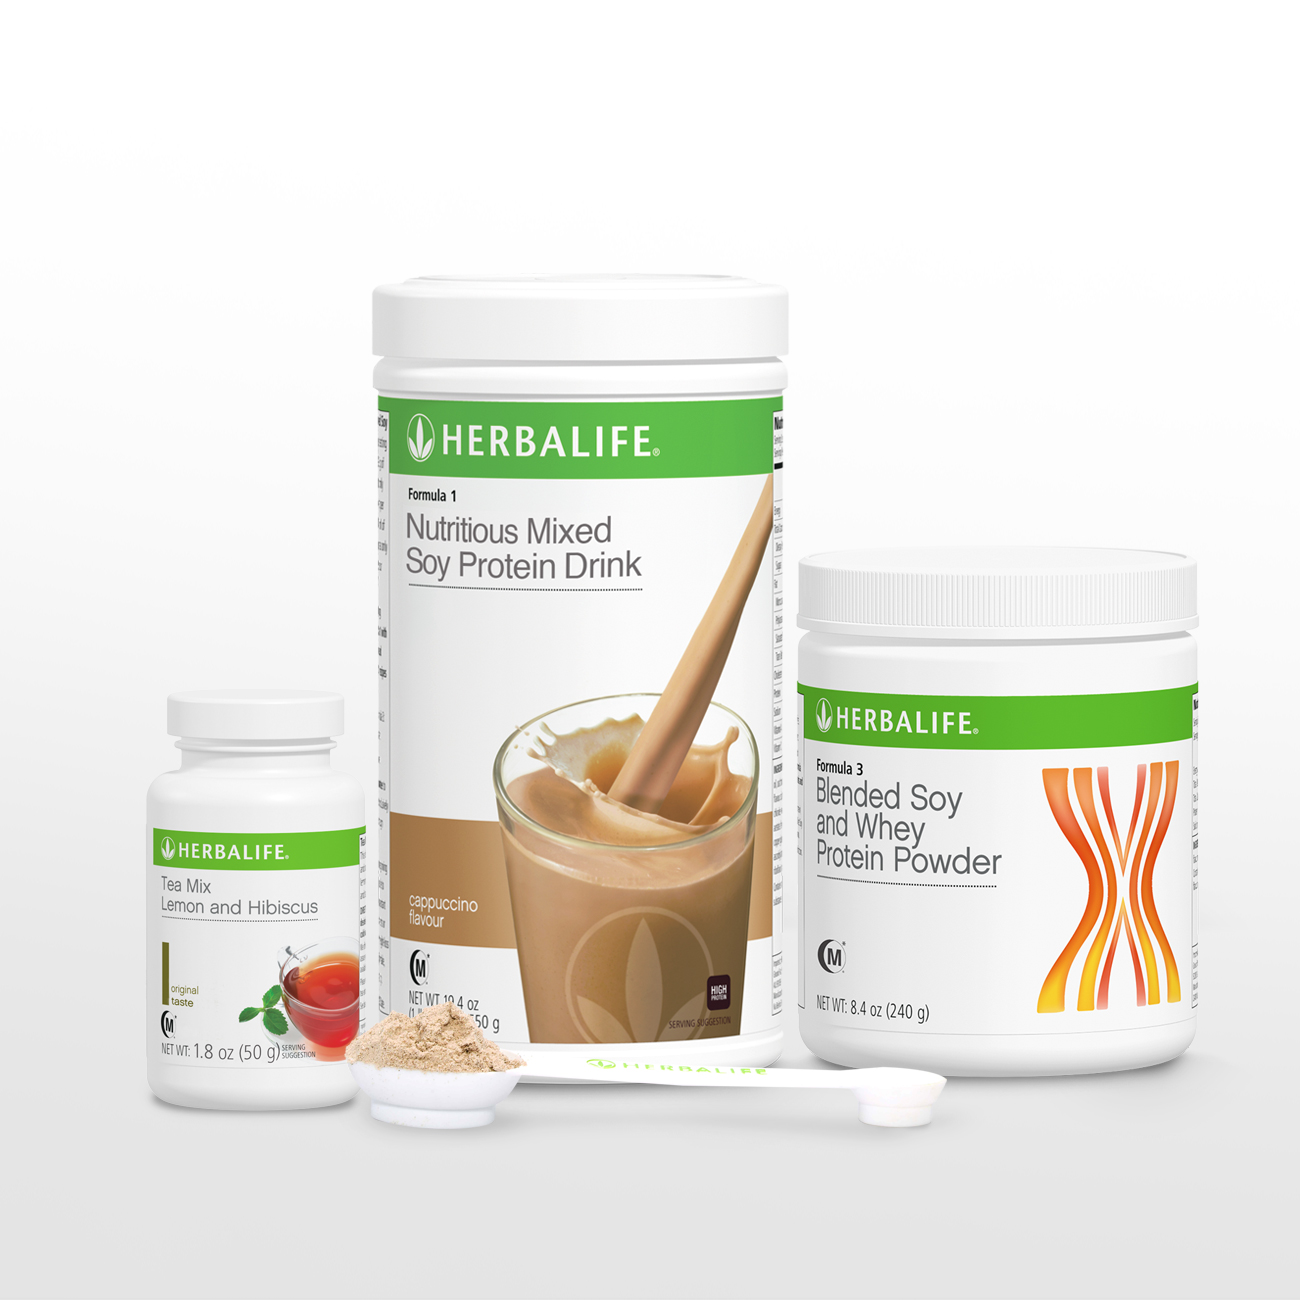 4284 Healthy Weight Management Start Now Pack F1(Flavors) / F3 Protein Powder / Tea Mix (LH 50g) Cappuccino